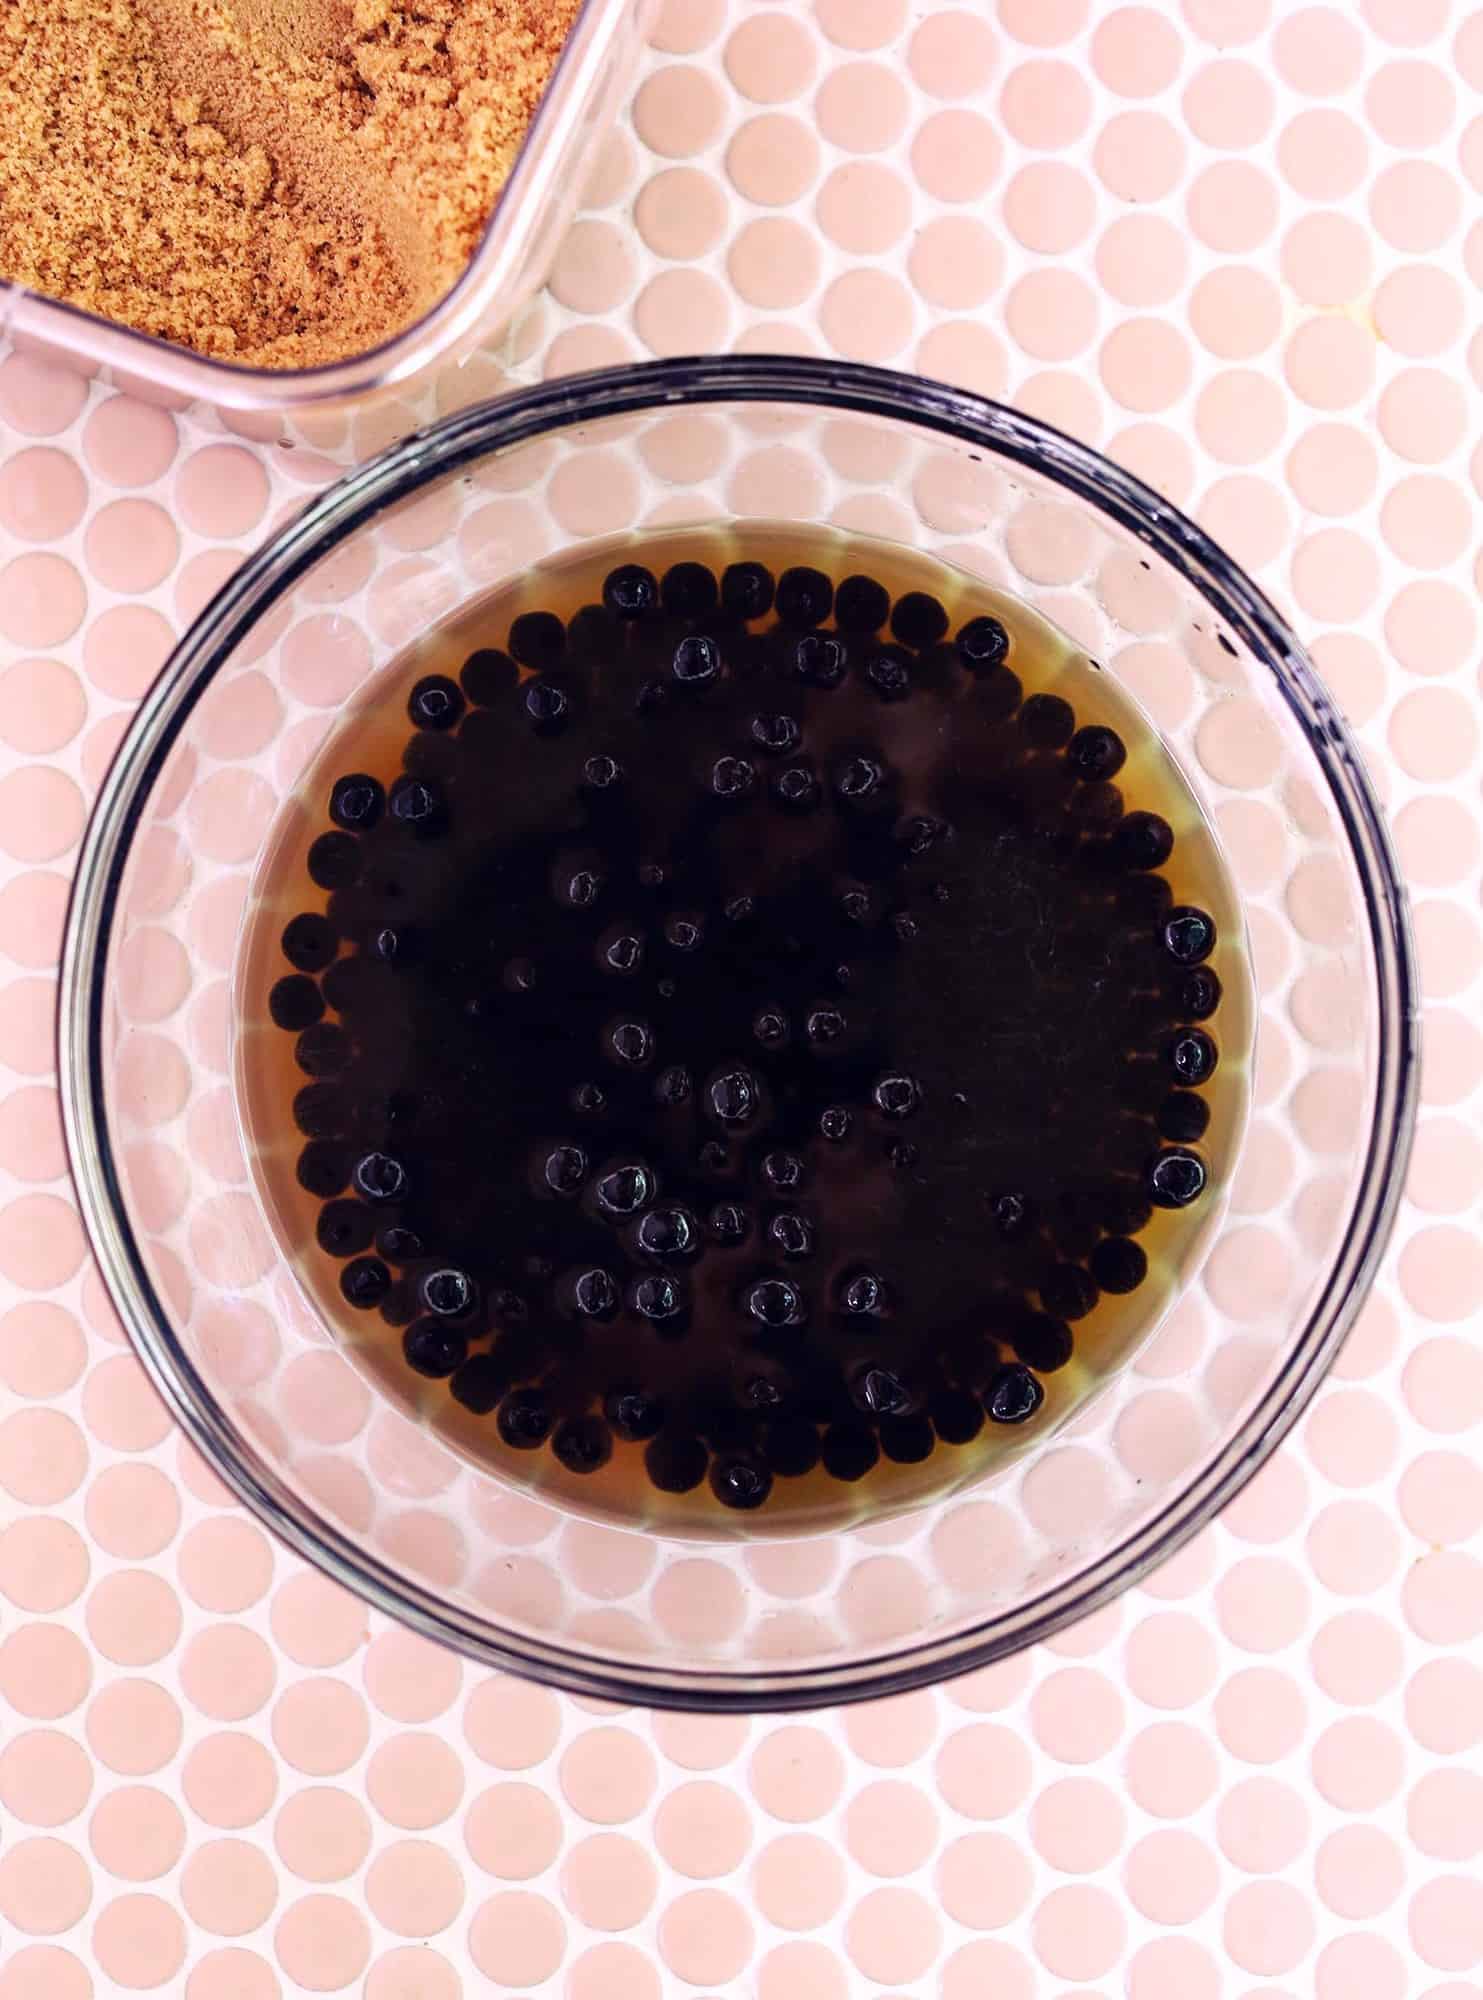 glass mixing bowl of boba pearls in water